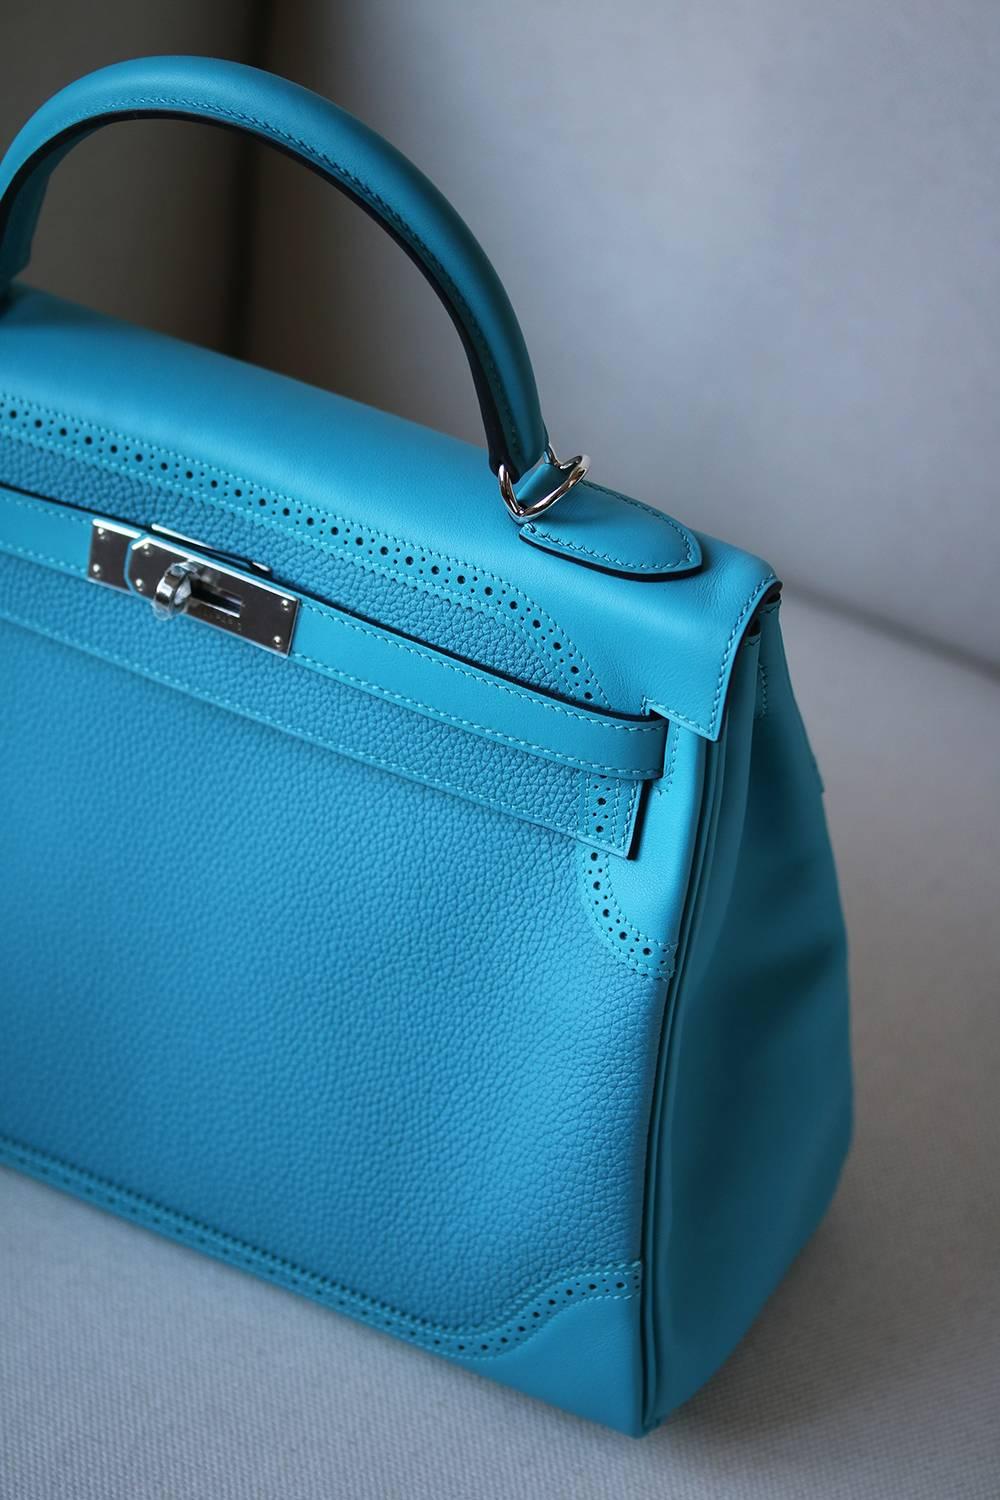 Hermès 32cm Kelly in beautiful Ghillies Togo leather with palladium hardware. Luxuriously rich Hermès turquoise colour with tonal top stitching.

Year: Date stamp is a T in a square - 2015 production.

Condition: This bag is brand-new, unworn in its